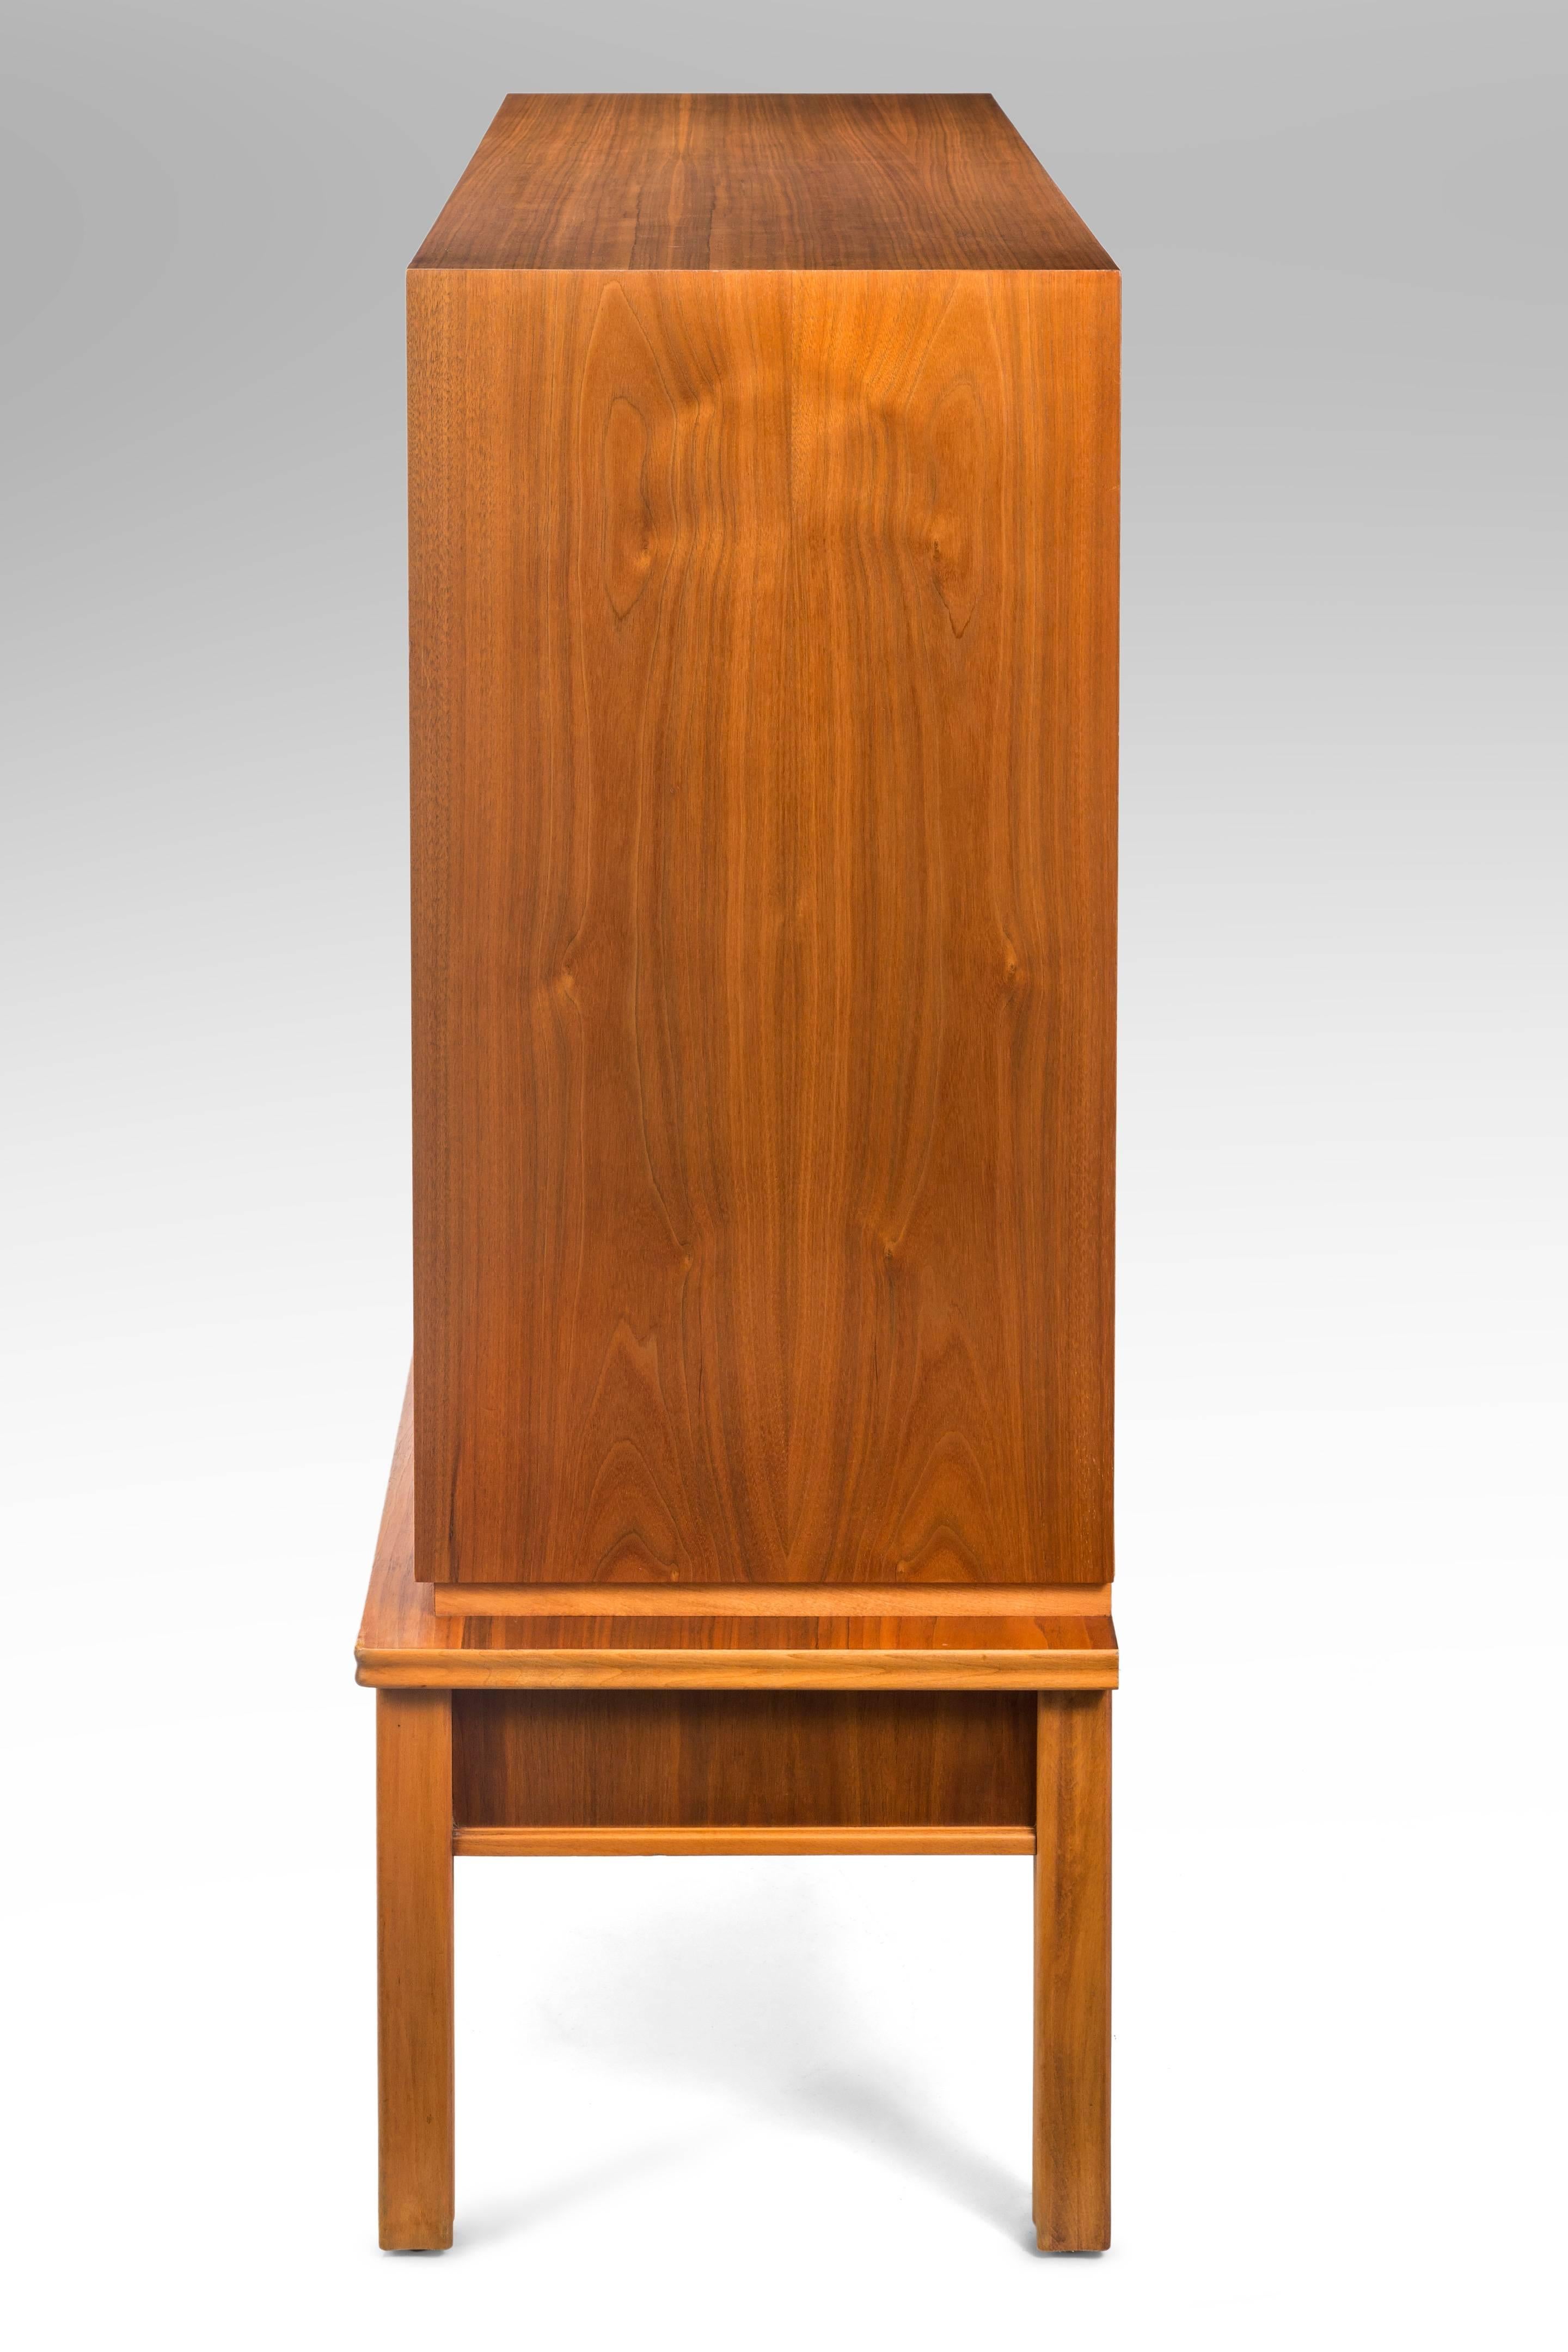 20th Century Oscar Nilsson, Attributed, Swedish Walnut and Beech Cabinet For Sale